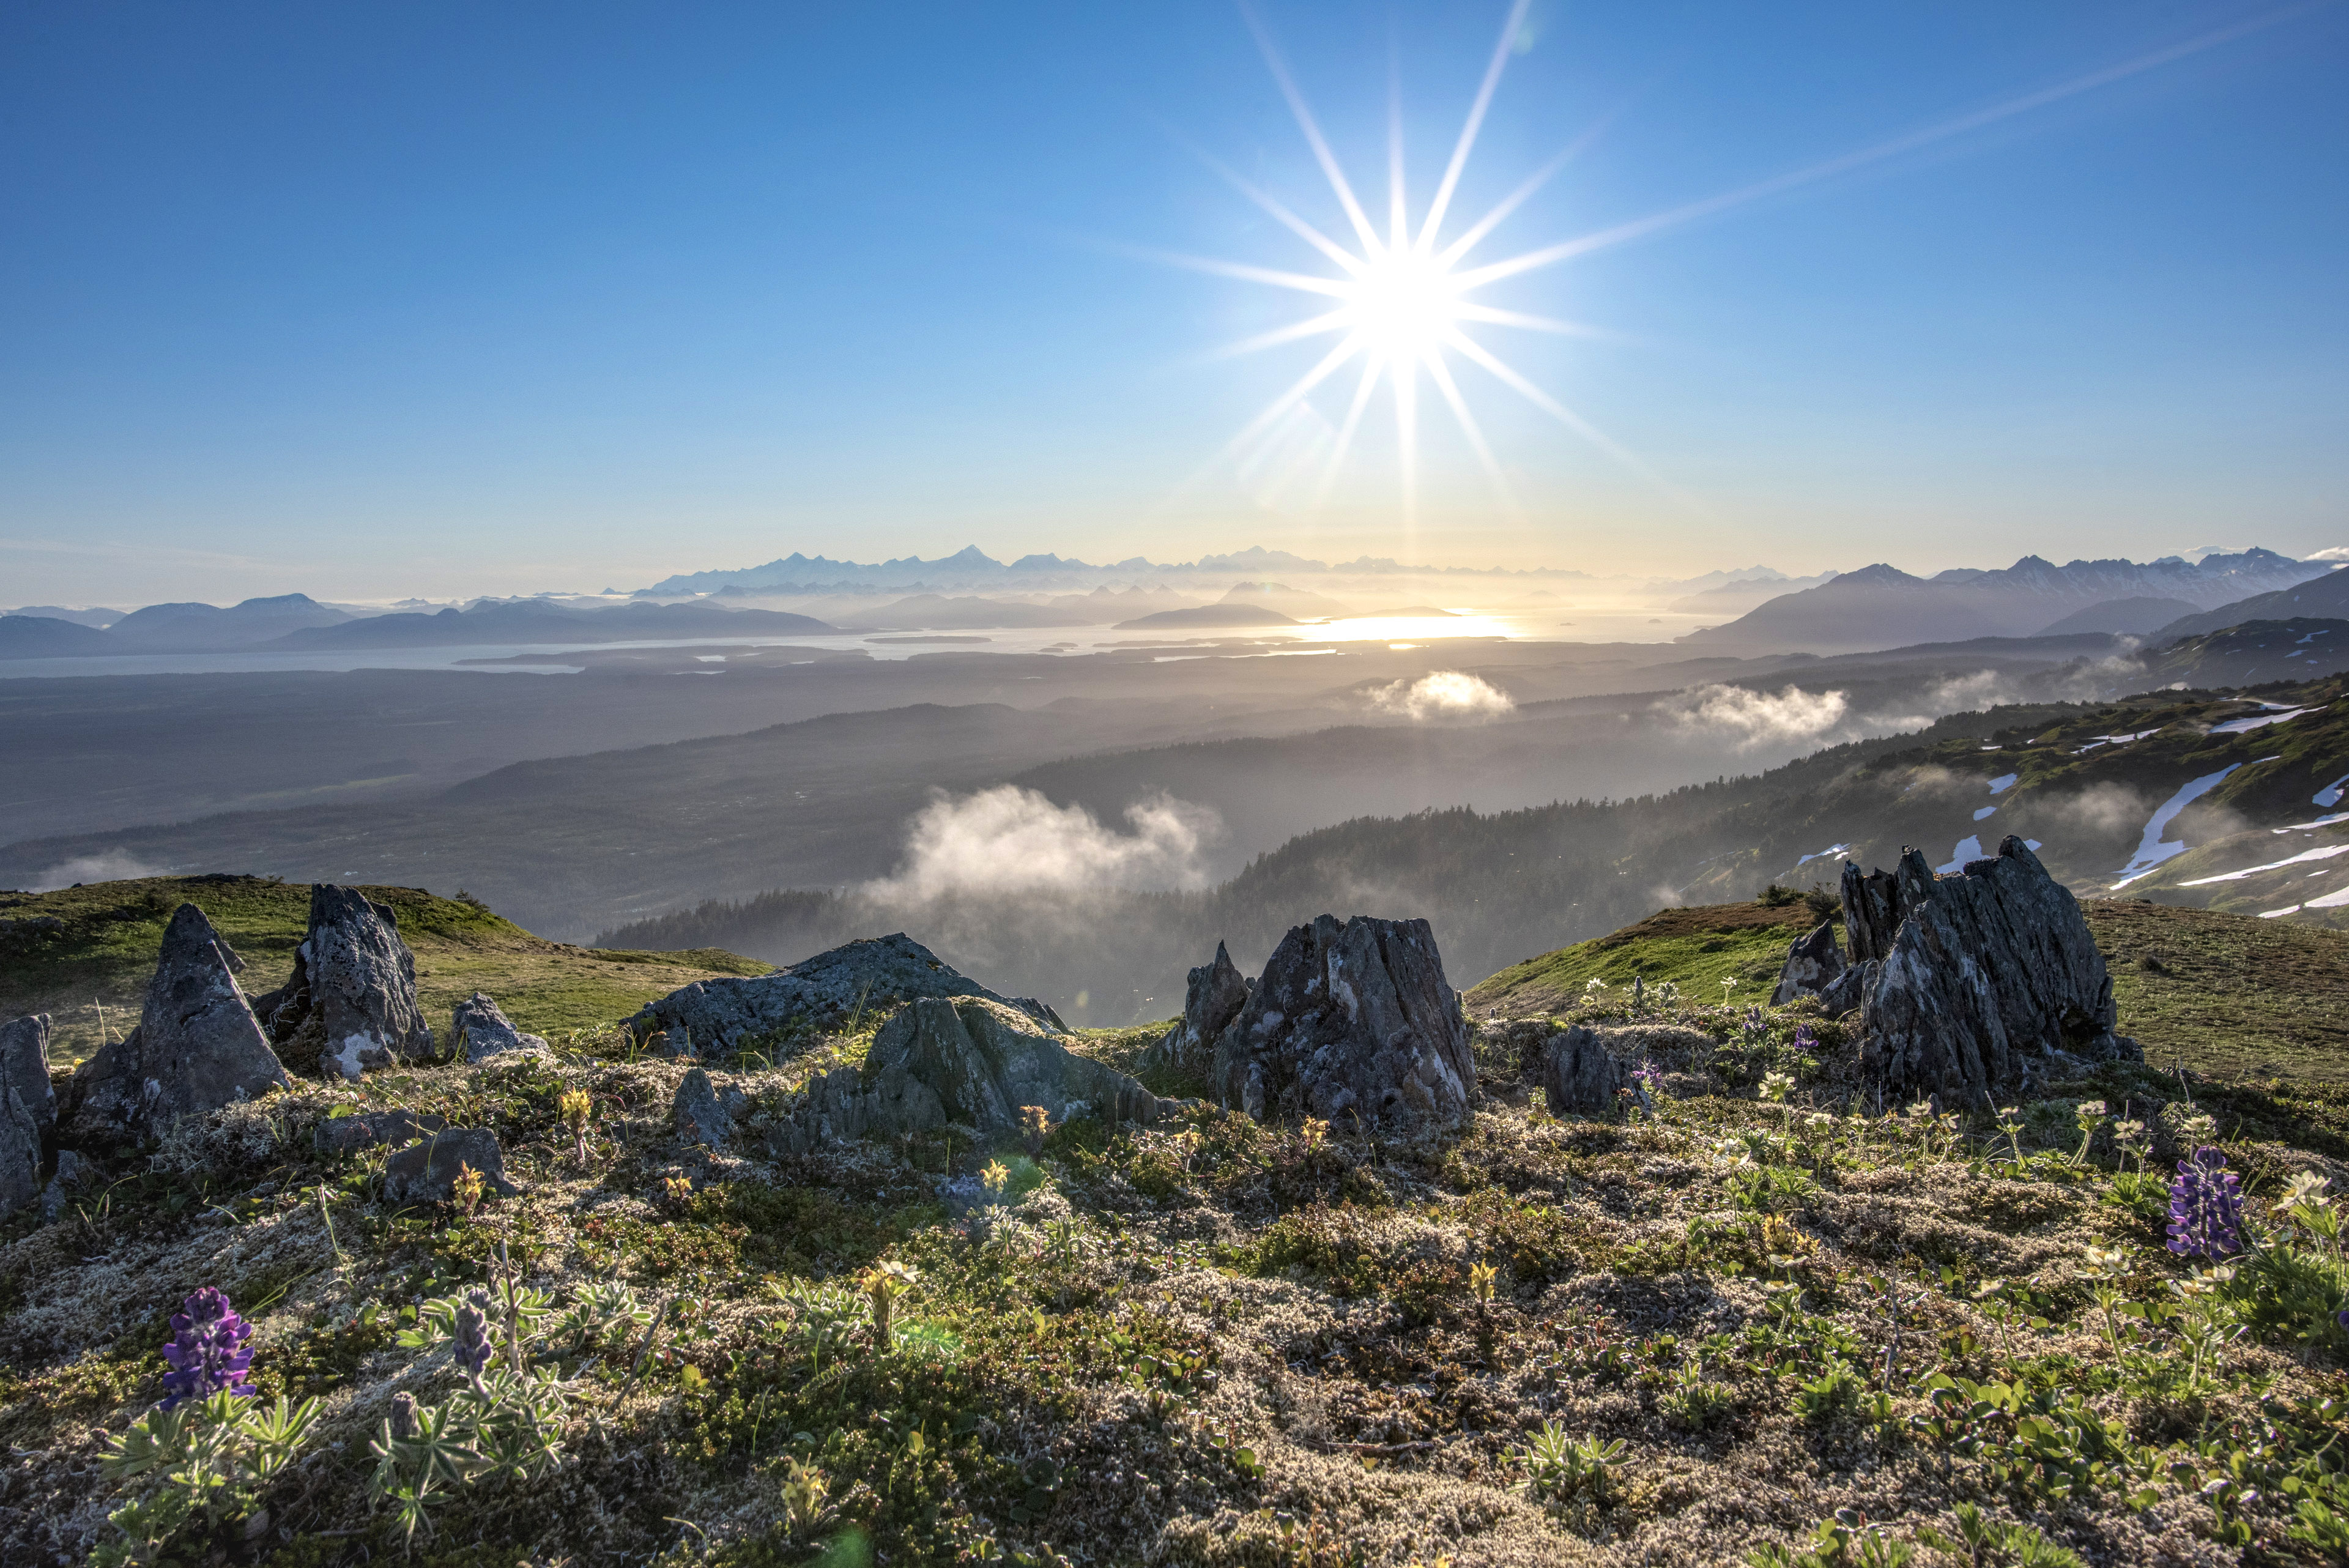 Vast view from atop a mountain ridge showing distant tall mountains, a bay of water and surrounding forested scenery. A bright sun shines in the blue sky.